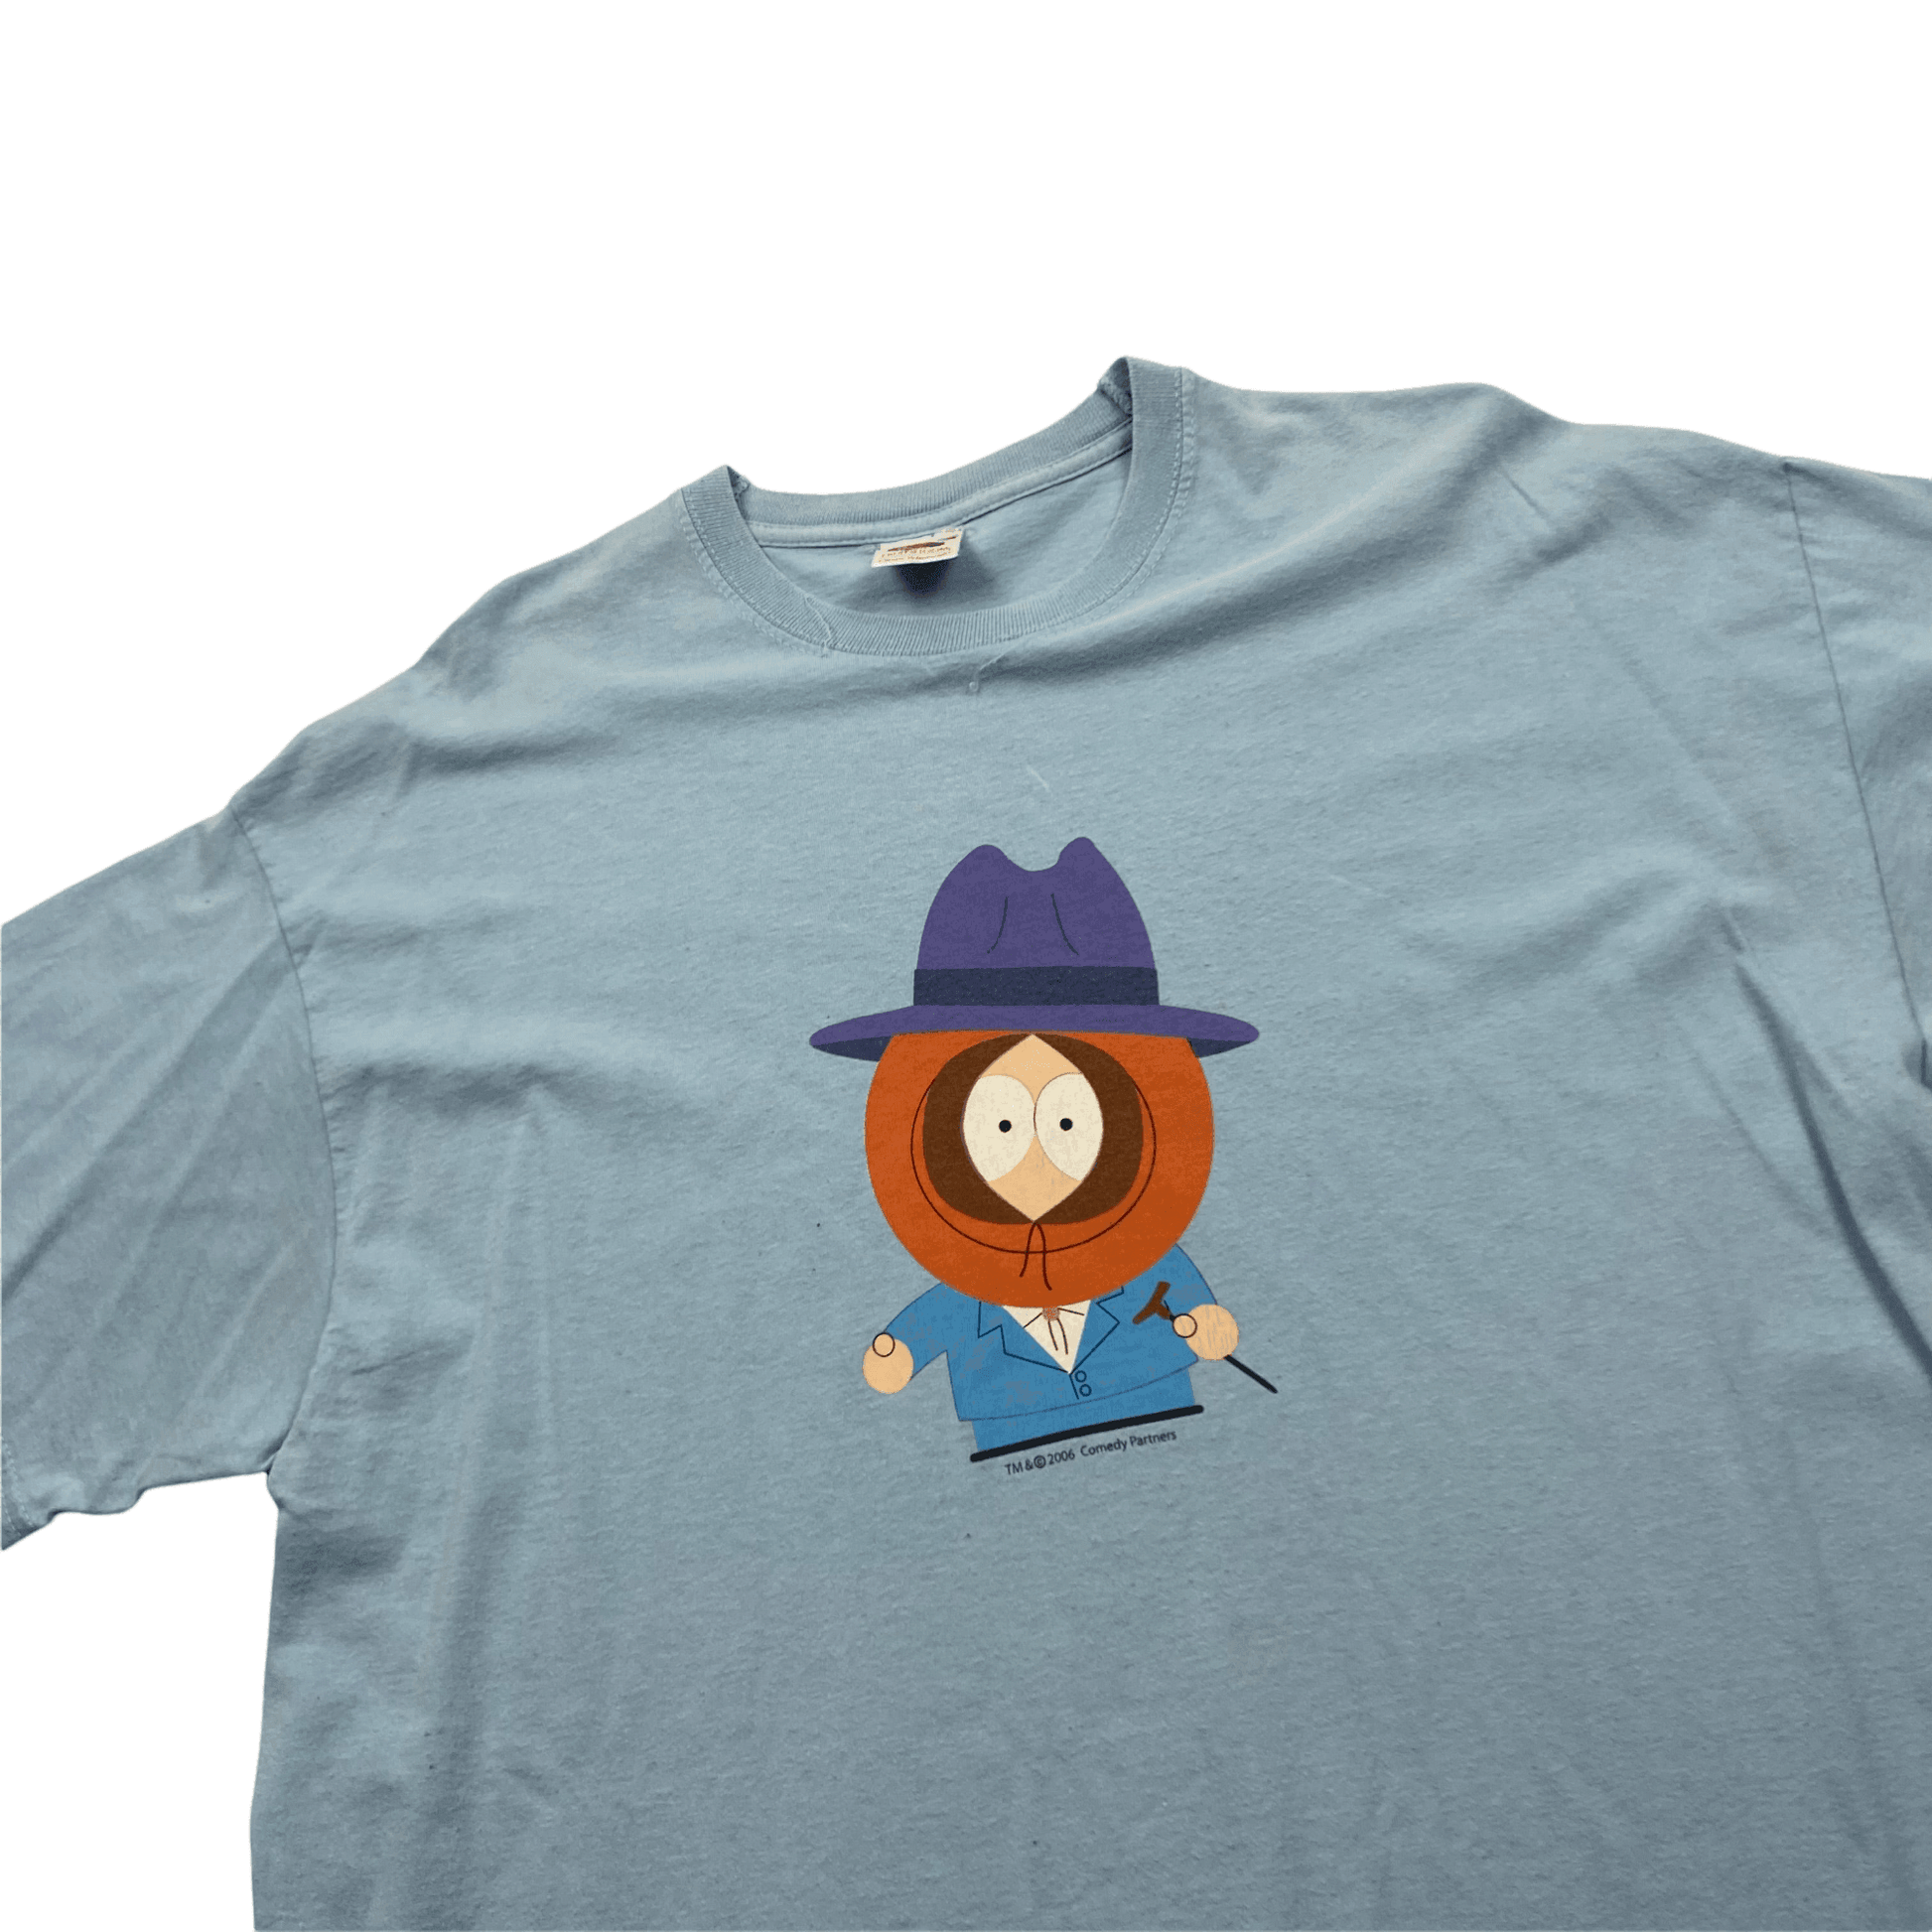 Vintage Light Blue 2006 Southpark Kenny Graphic Tee - Large - The Streetwear Studio